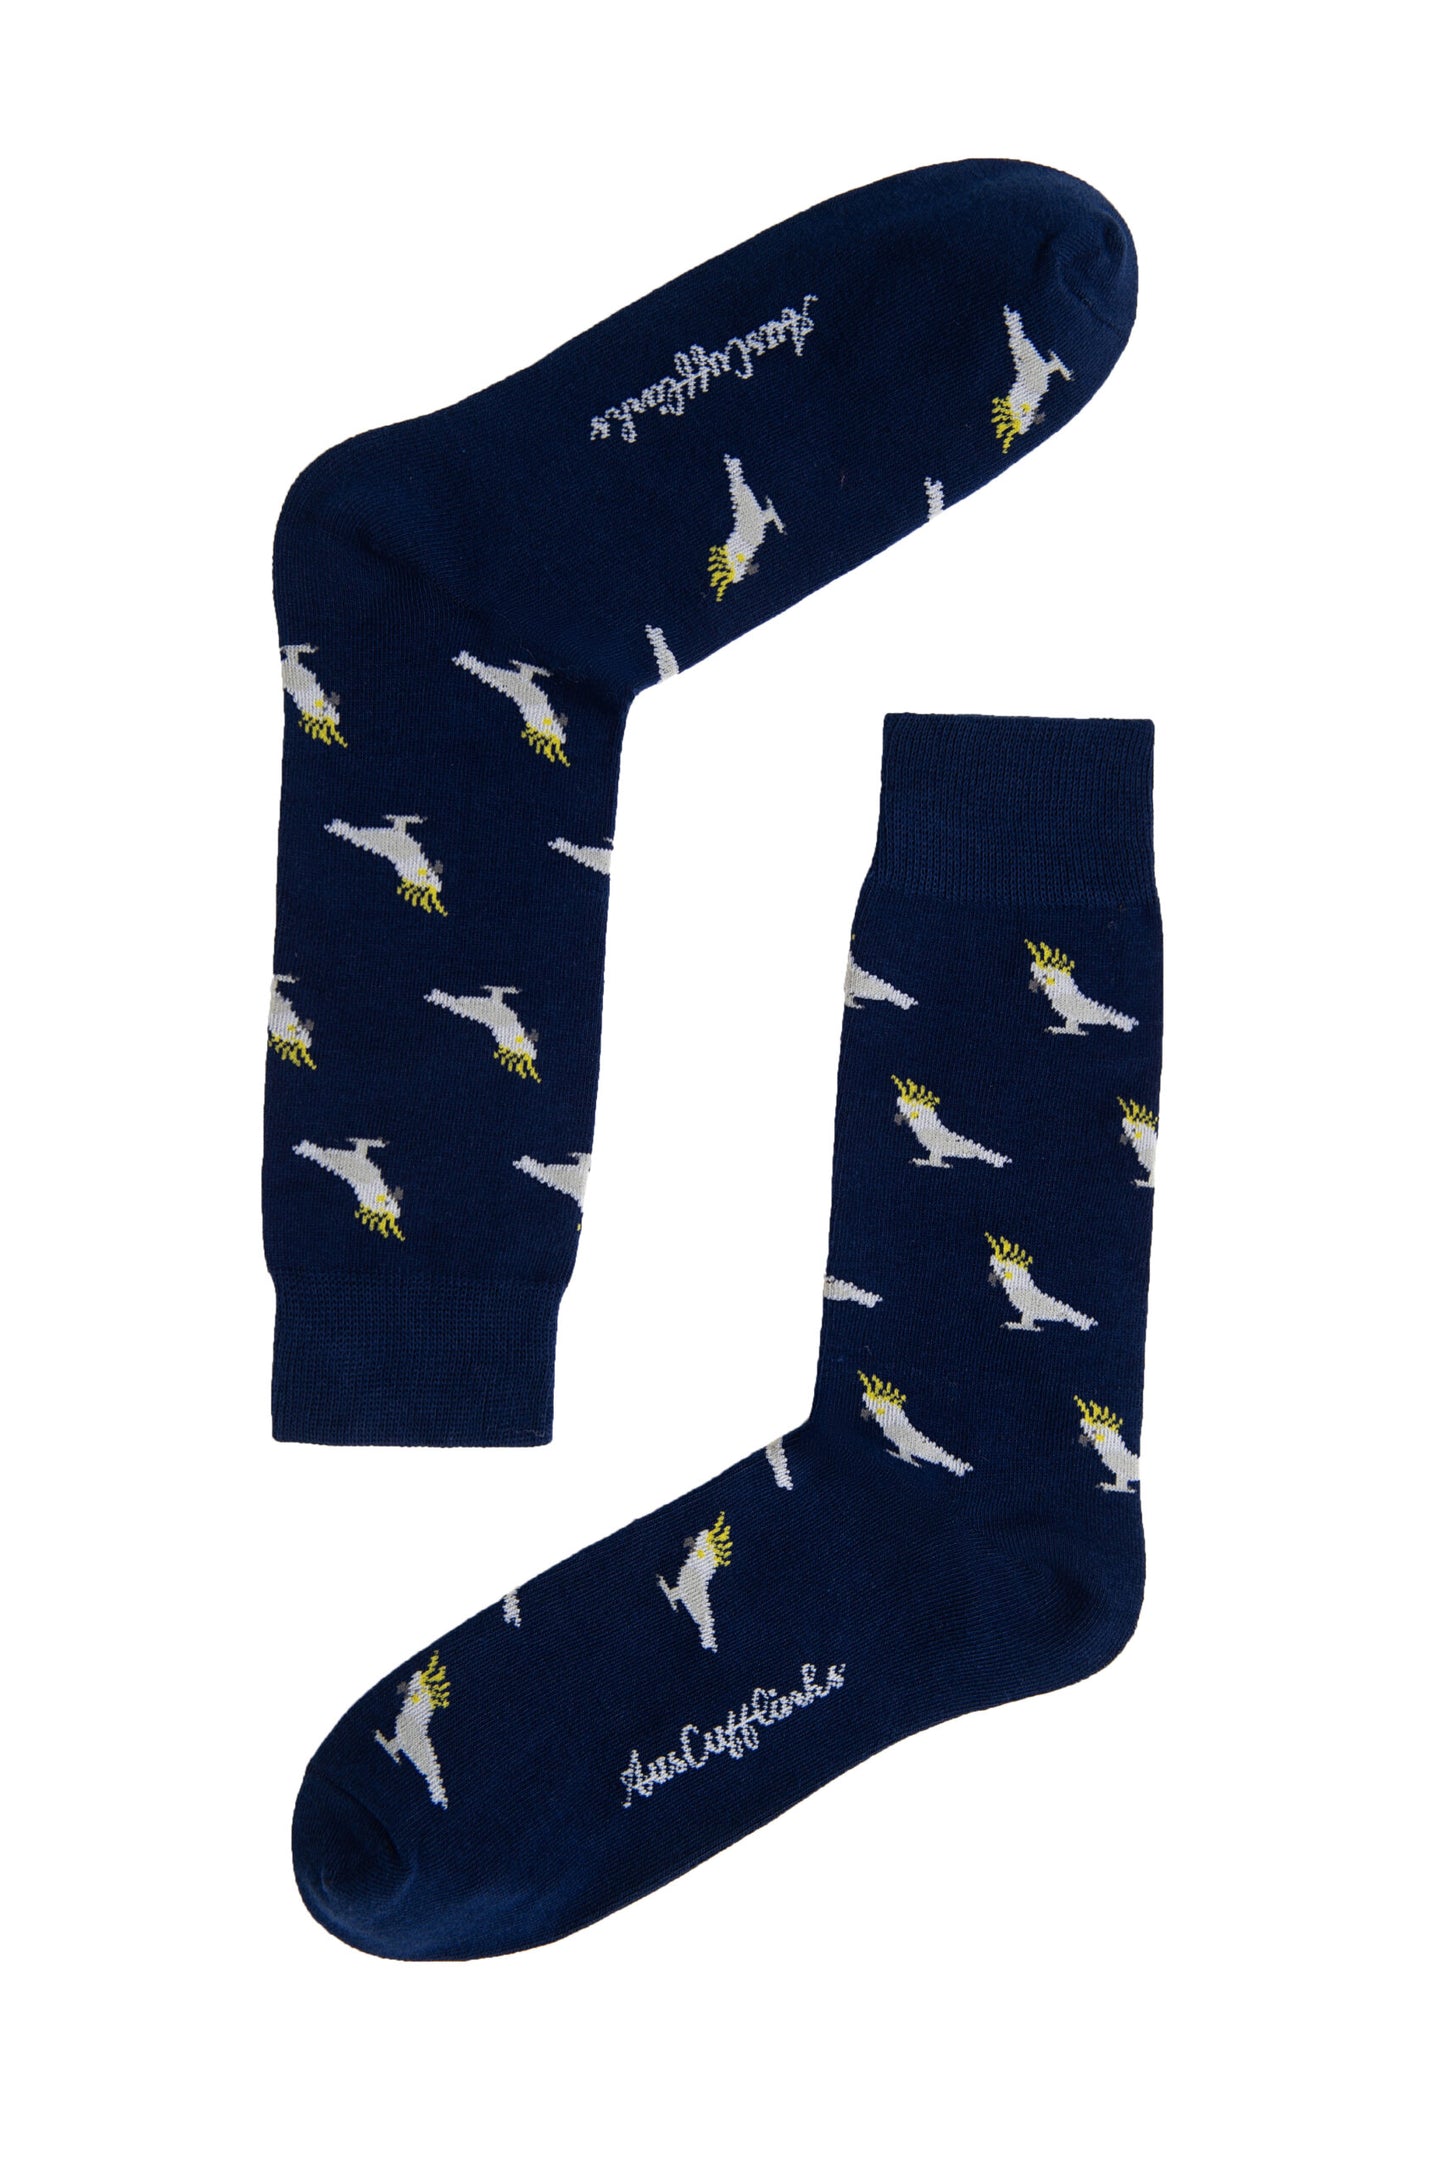 A pair of Cockatoo Socks with white and yellow images.